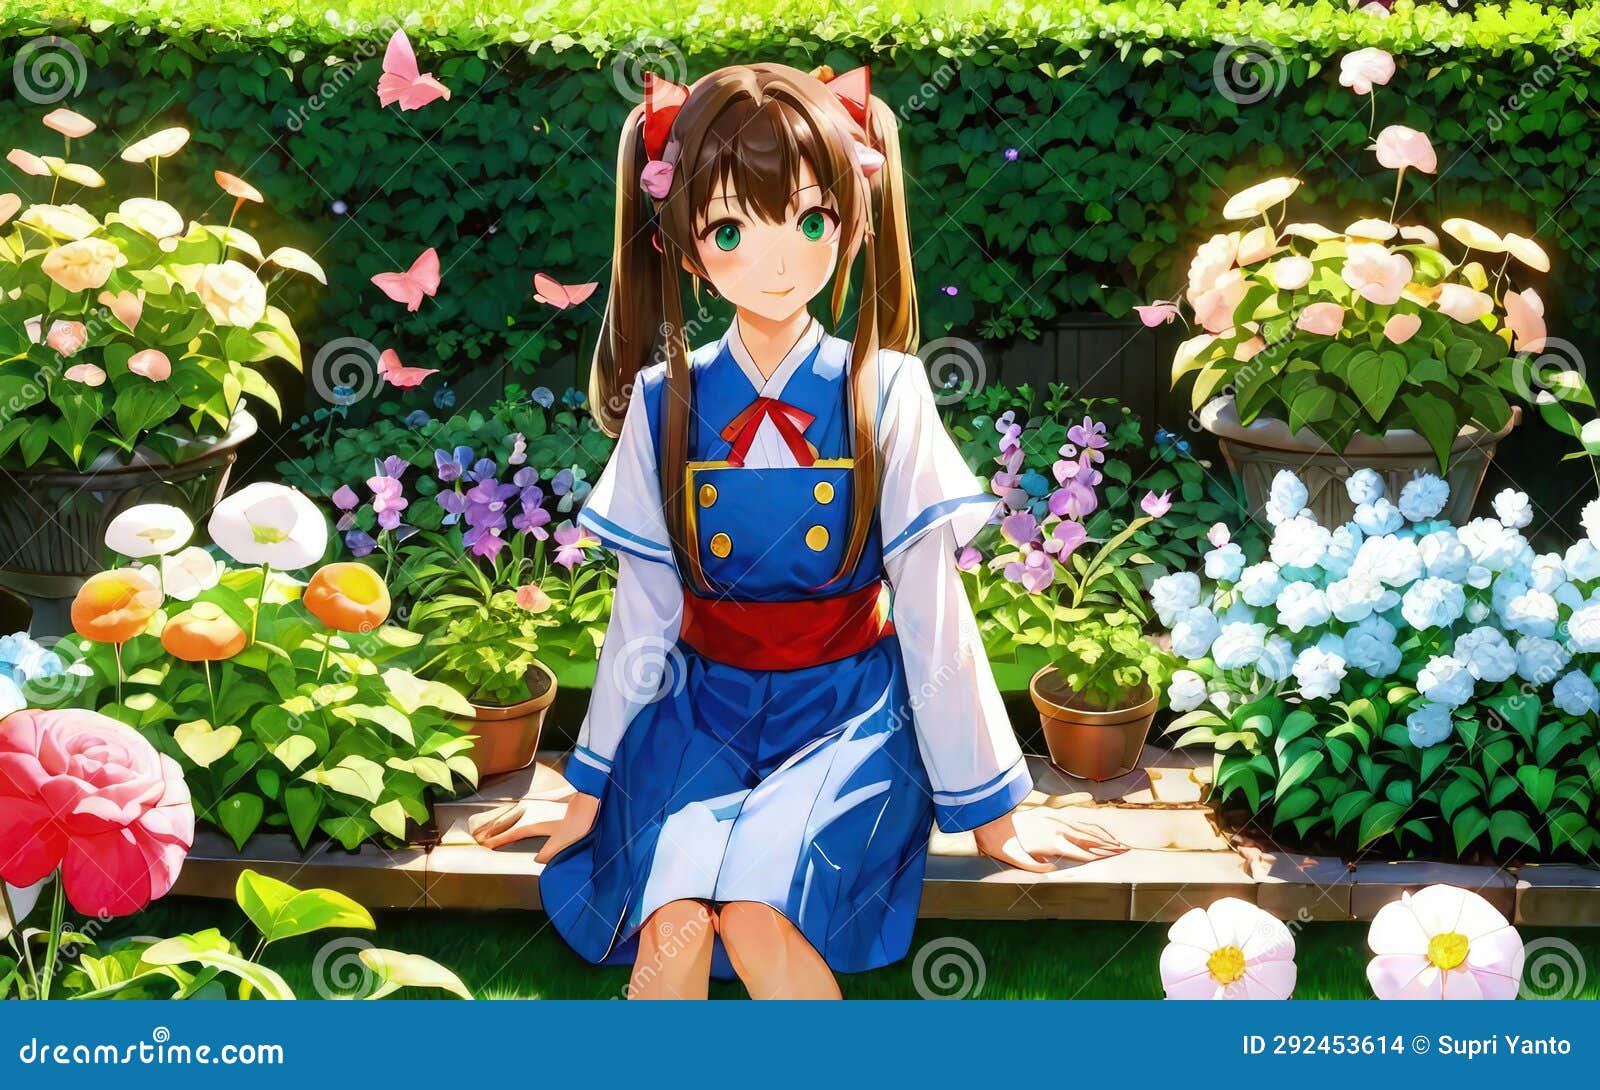 Beautiful Girl Anime in the Garden Environment with Assortment Plants ...